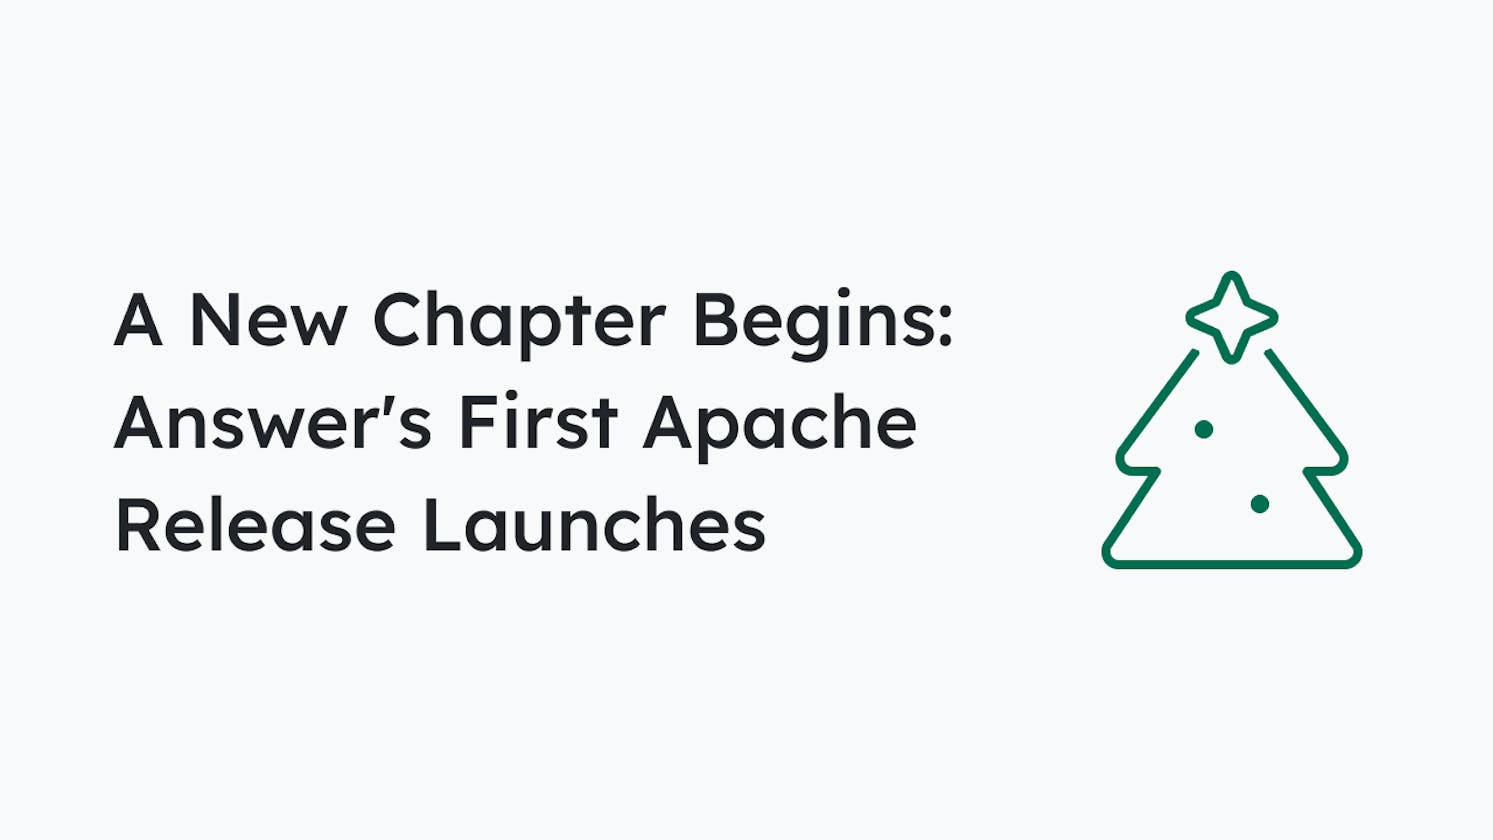 A New Chapter Begins: Answer's First Apache Release Launches